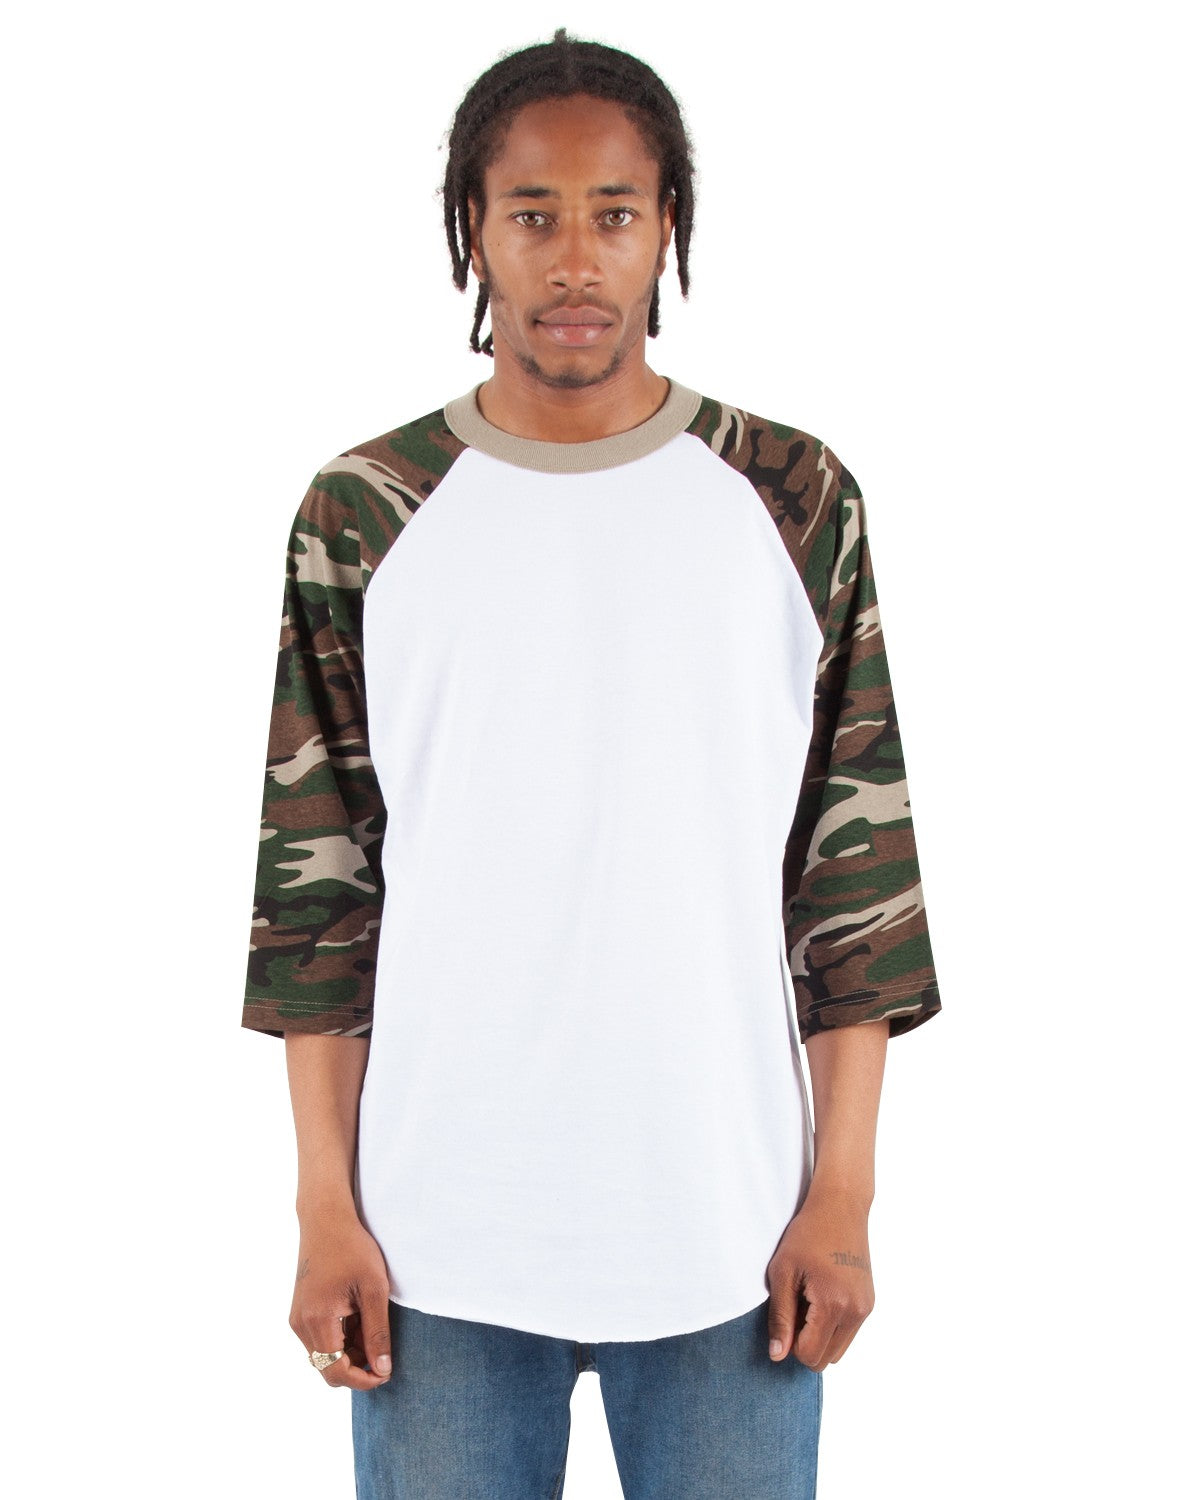 sengetøj Messing oprindelse Adult raglan White T-shirt with Camo Sleeves – Lucky Wholesale